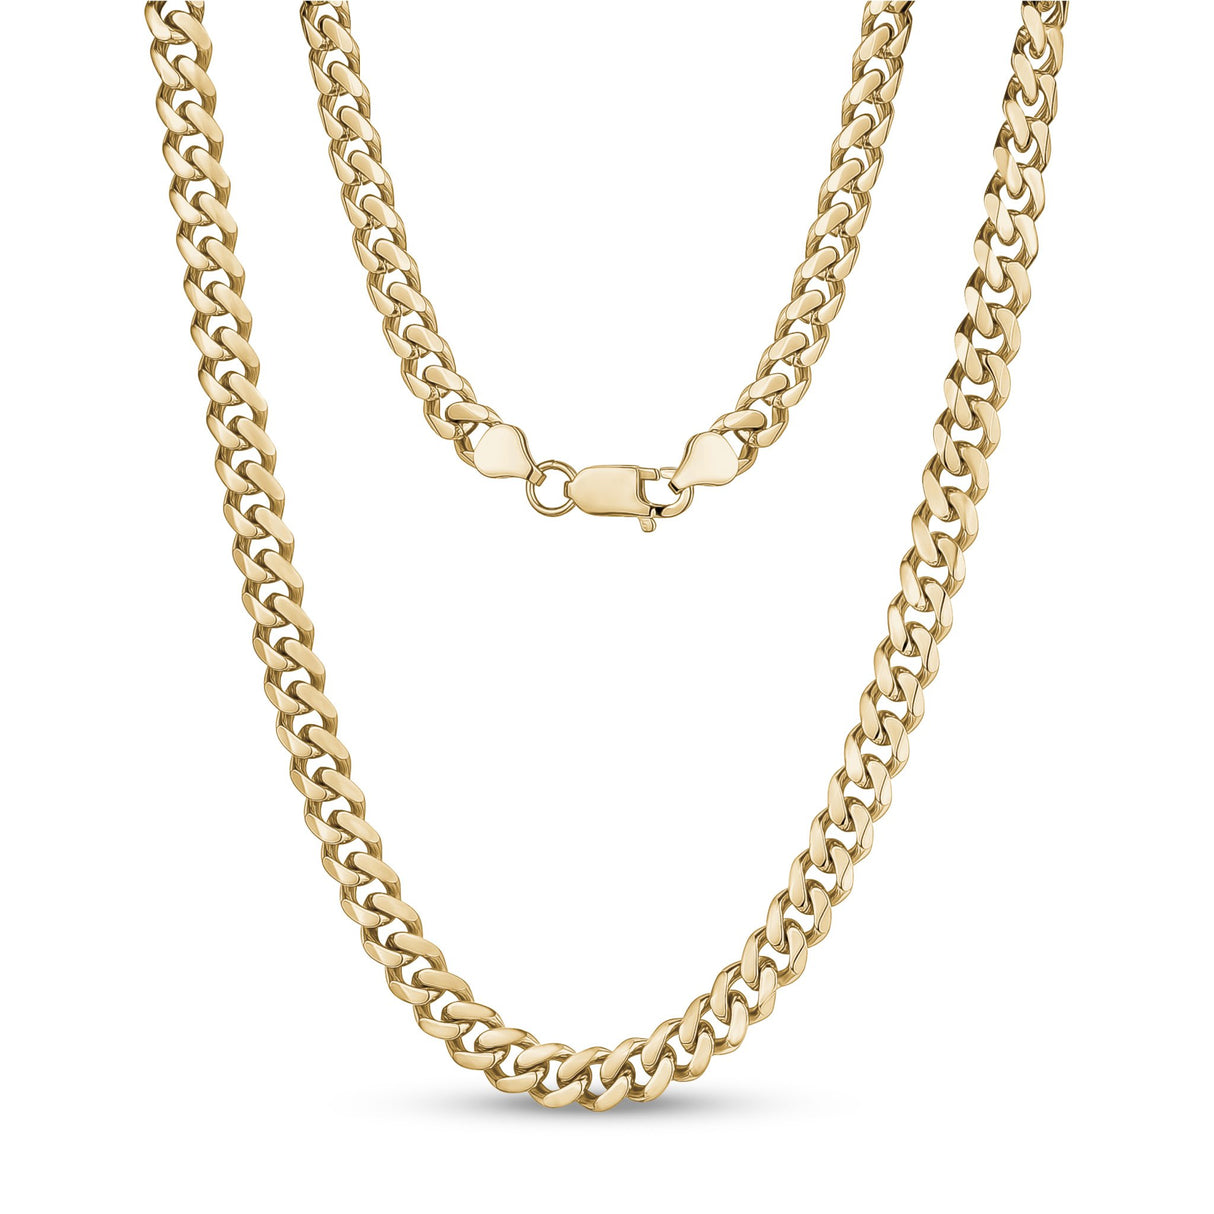 Women's Necklaces - 8mm Gold Stainless Steel Cuban Link Necklace